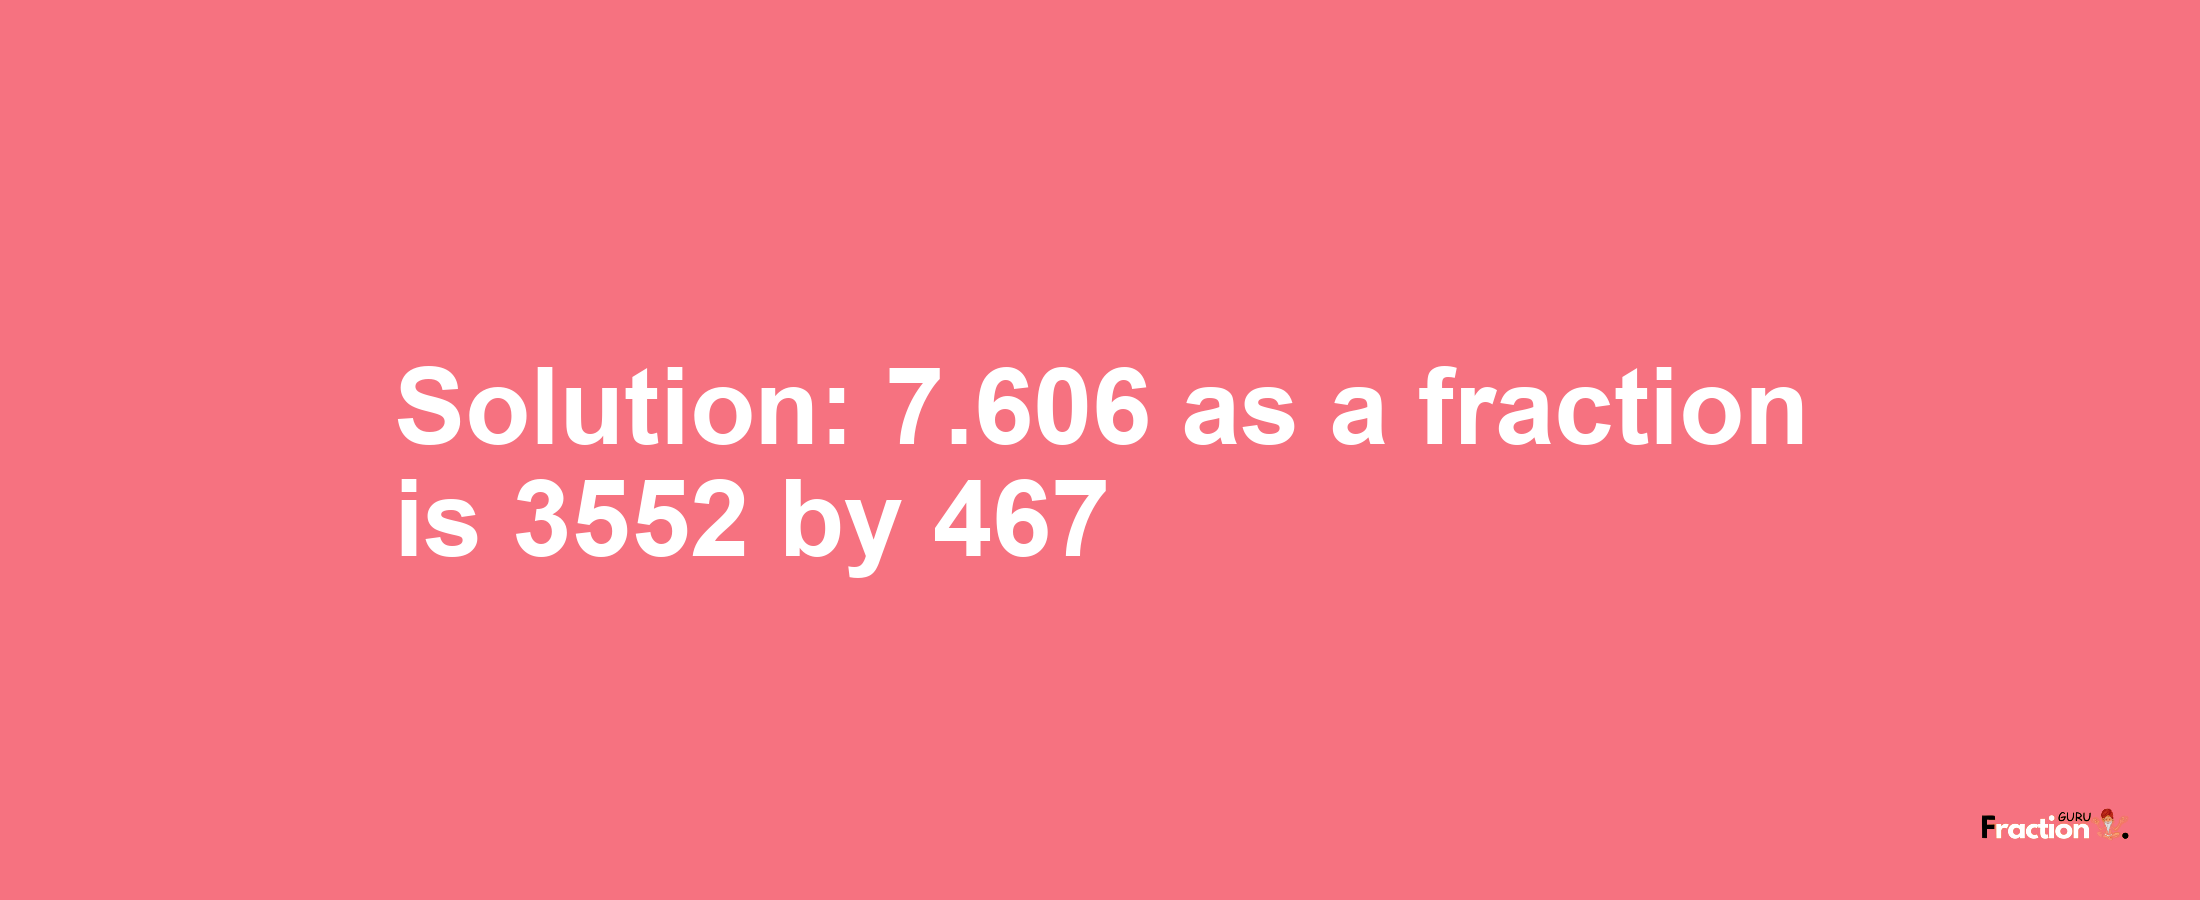 Solution:7.606 as a fraction is 3552/467